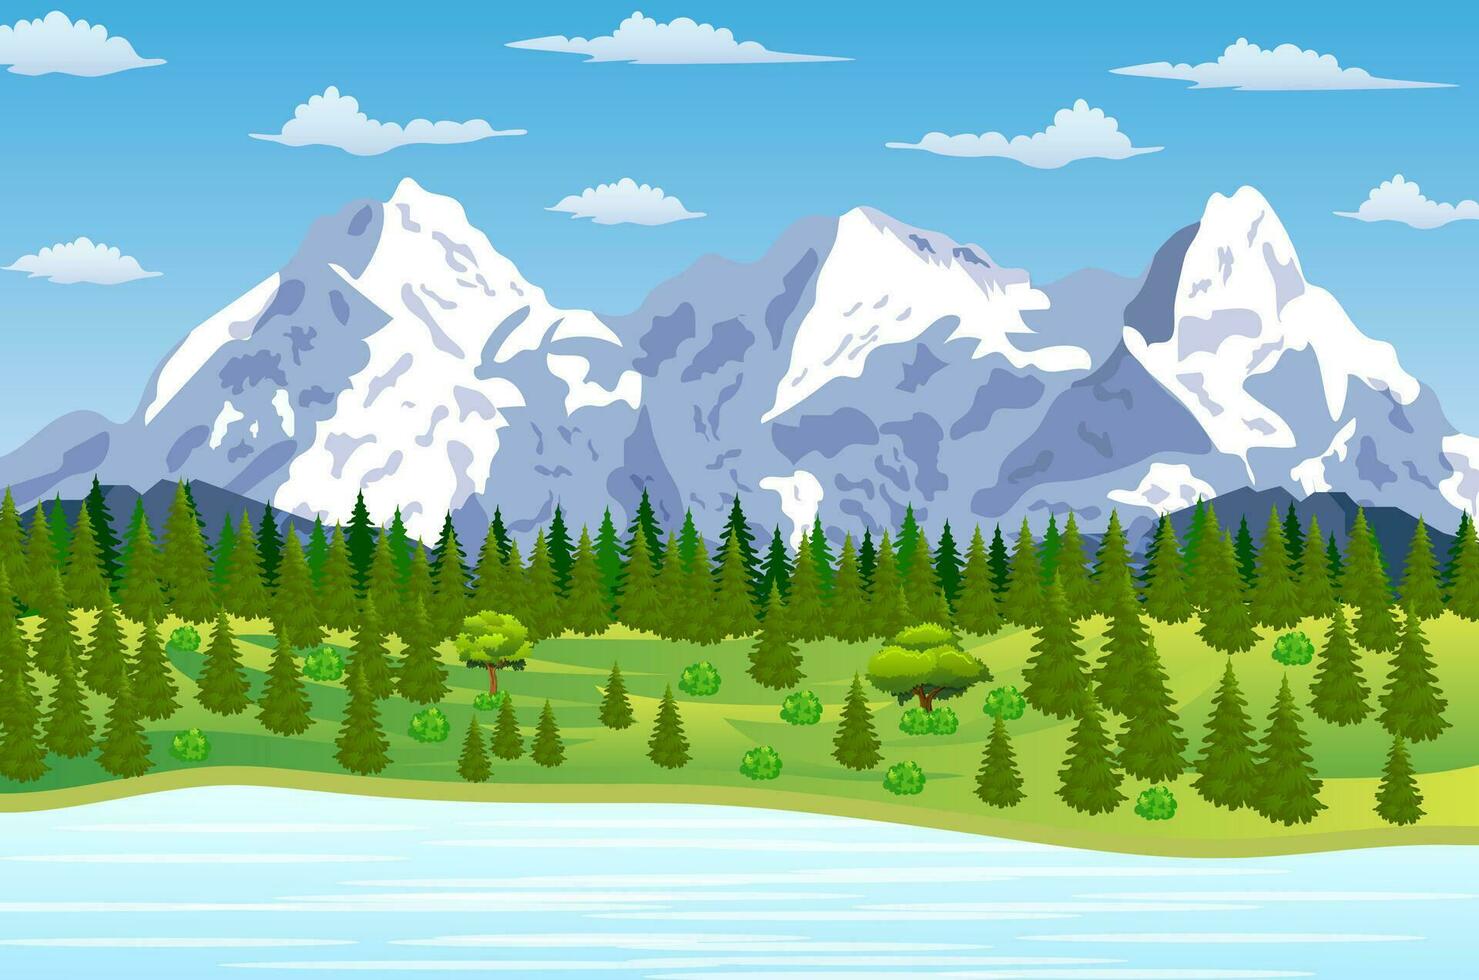 Summer landscape with meadows and mountains vector